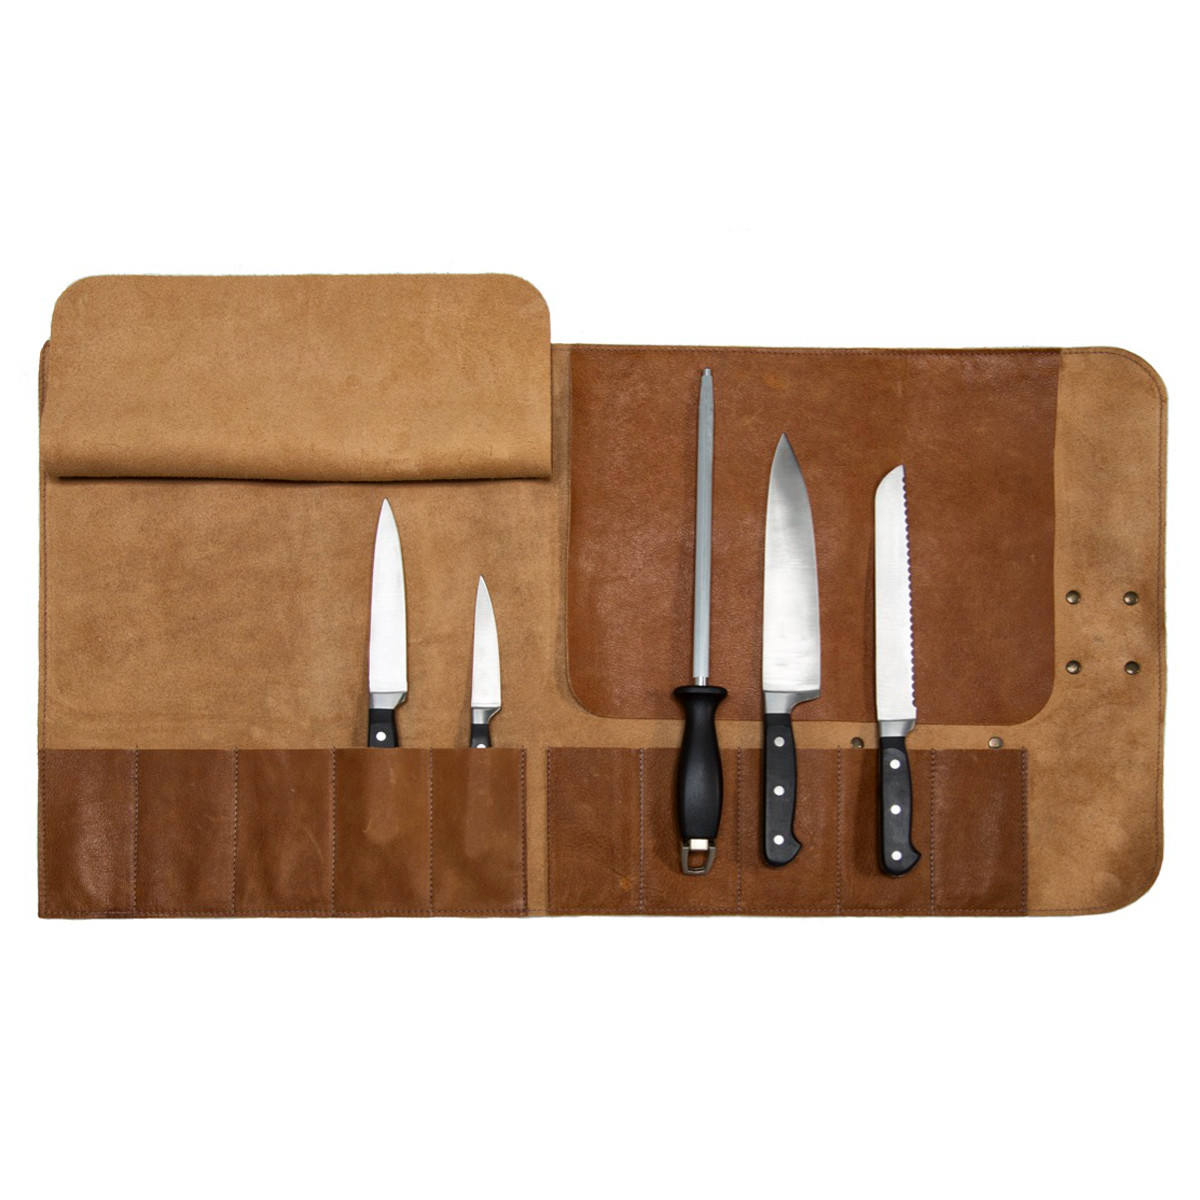 KNIFE ROLL BAG, leather brown - HEIROL Global - Kitchenware for life